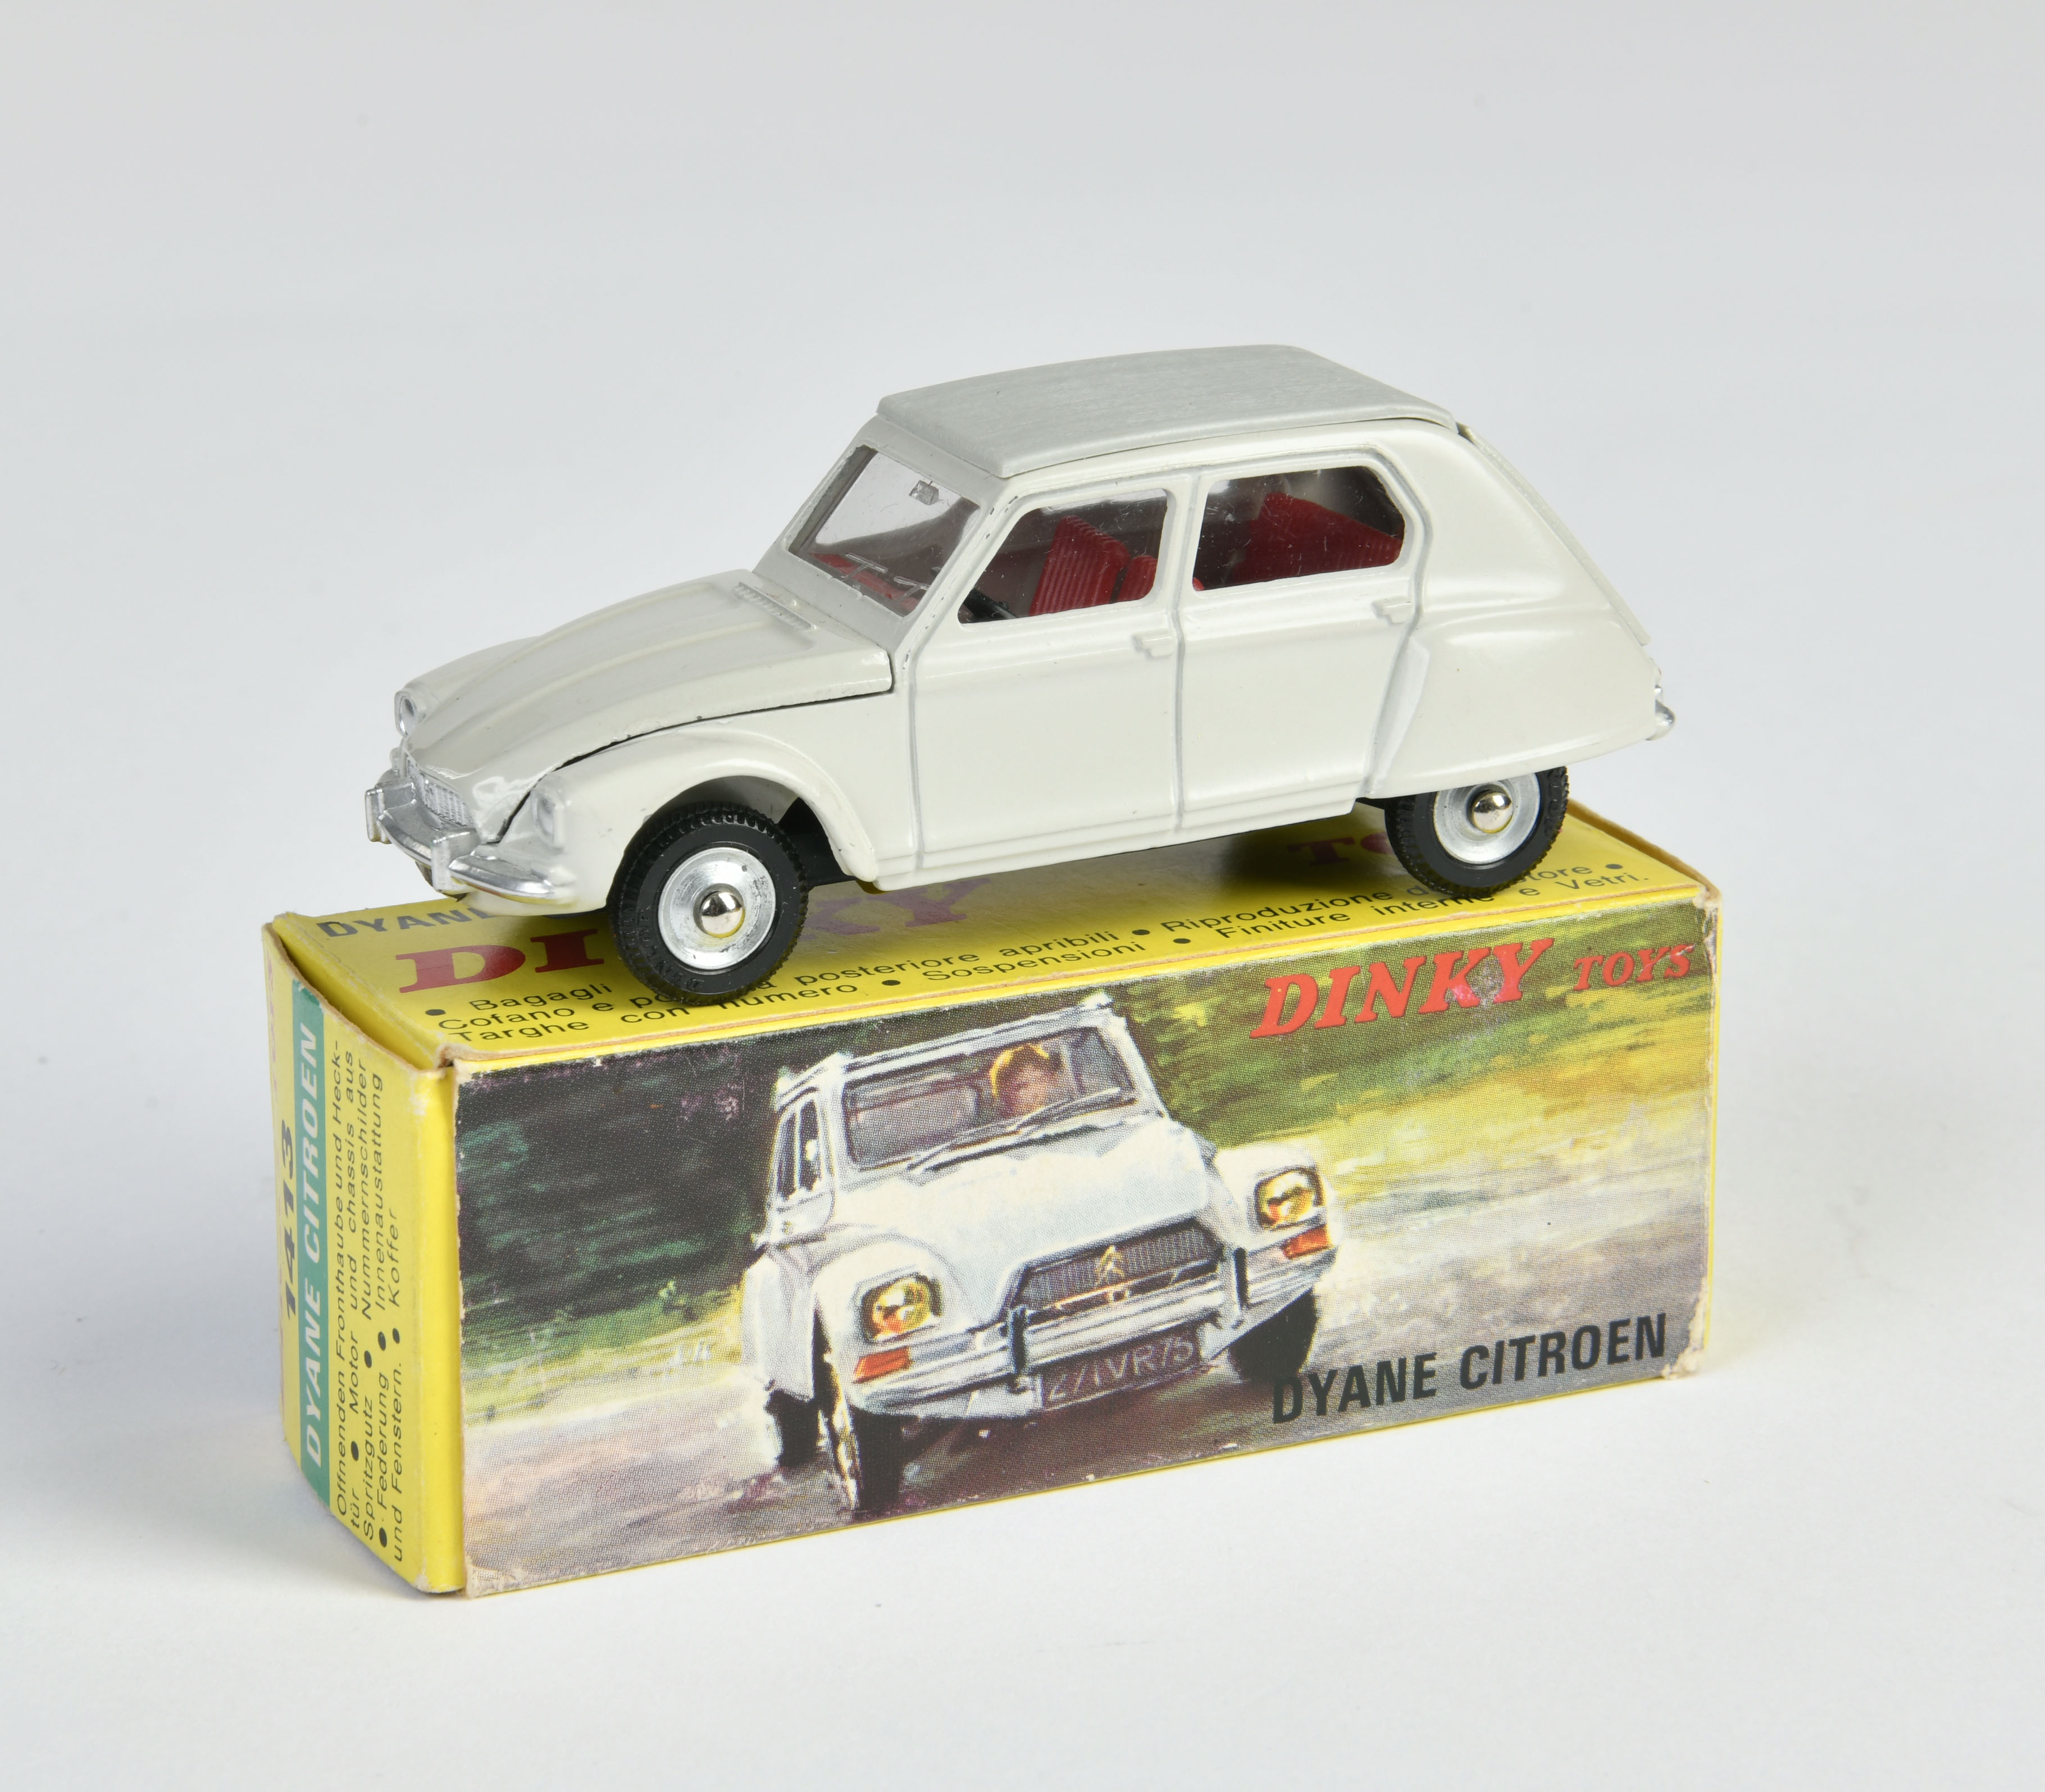 Dinky Toys, Citroen Diane, grey, with 2 suitcases, France, 1:43, diecast, box C 1, C 1